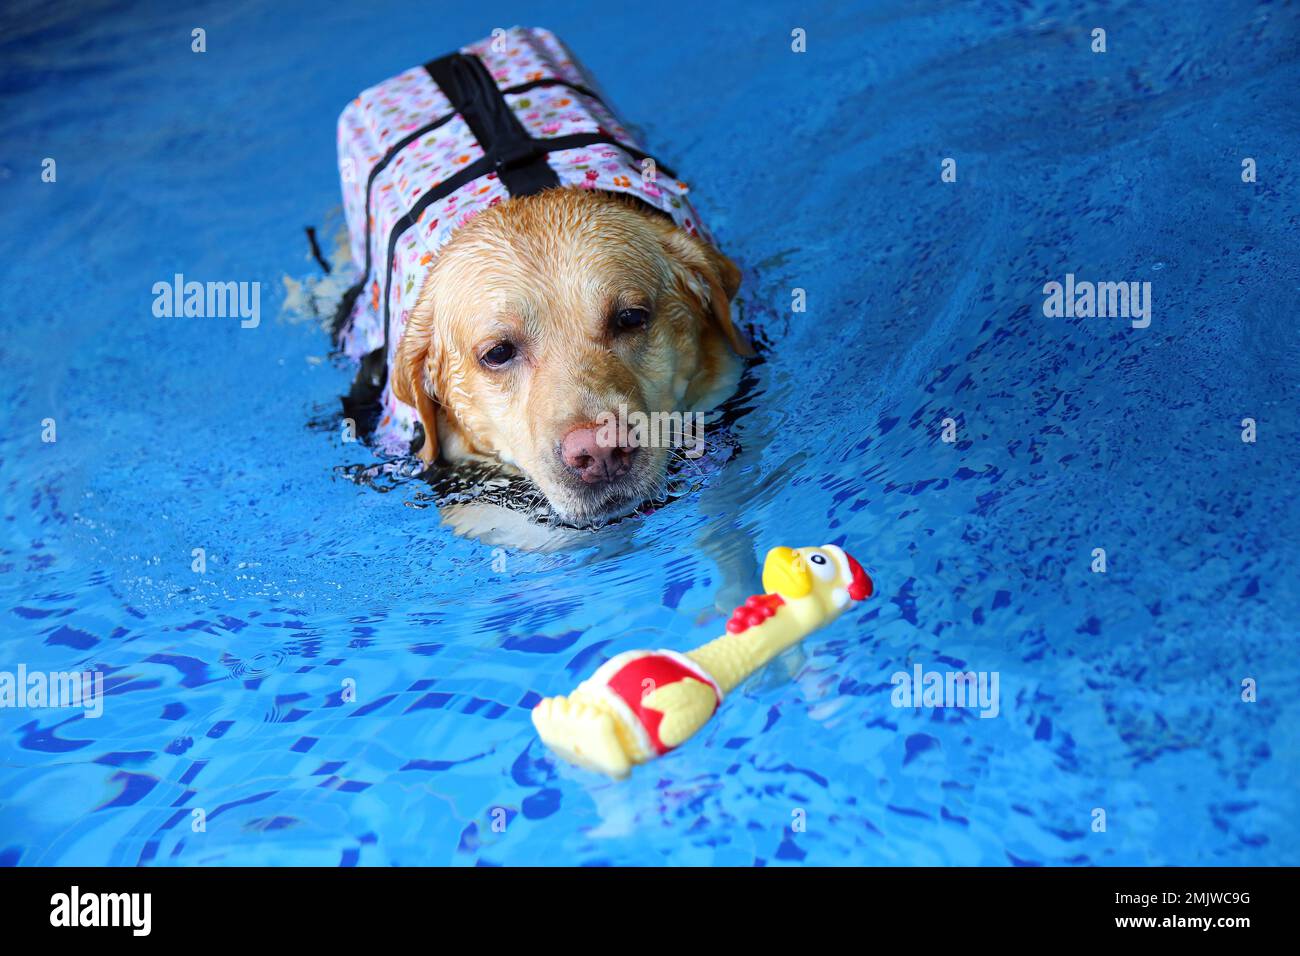 Labrador Retriever  wearing life jacket and playing toy at the pool. Dog swimming. Dog playing with toy. Stock Photo